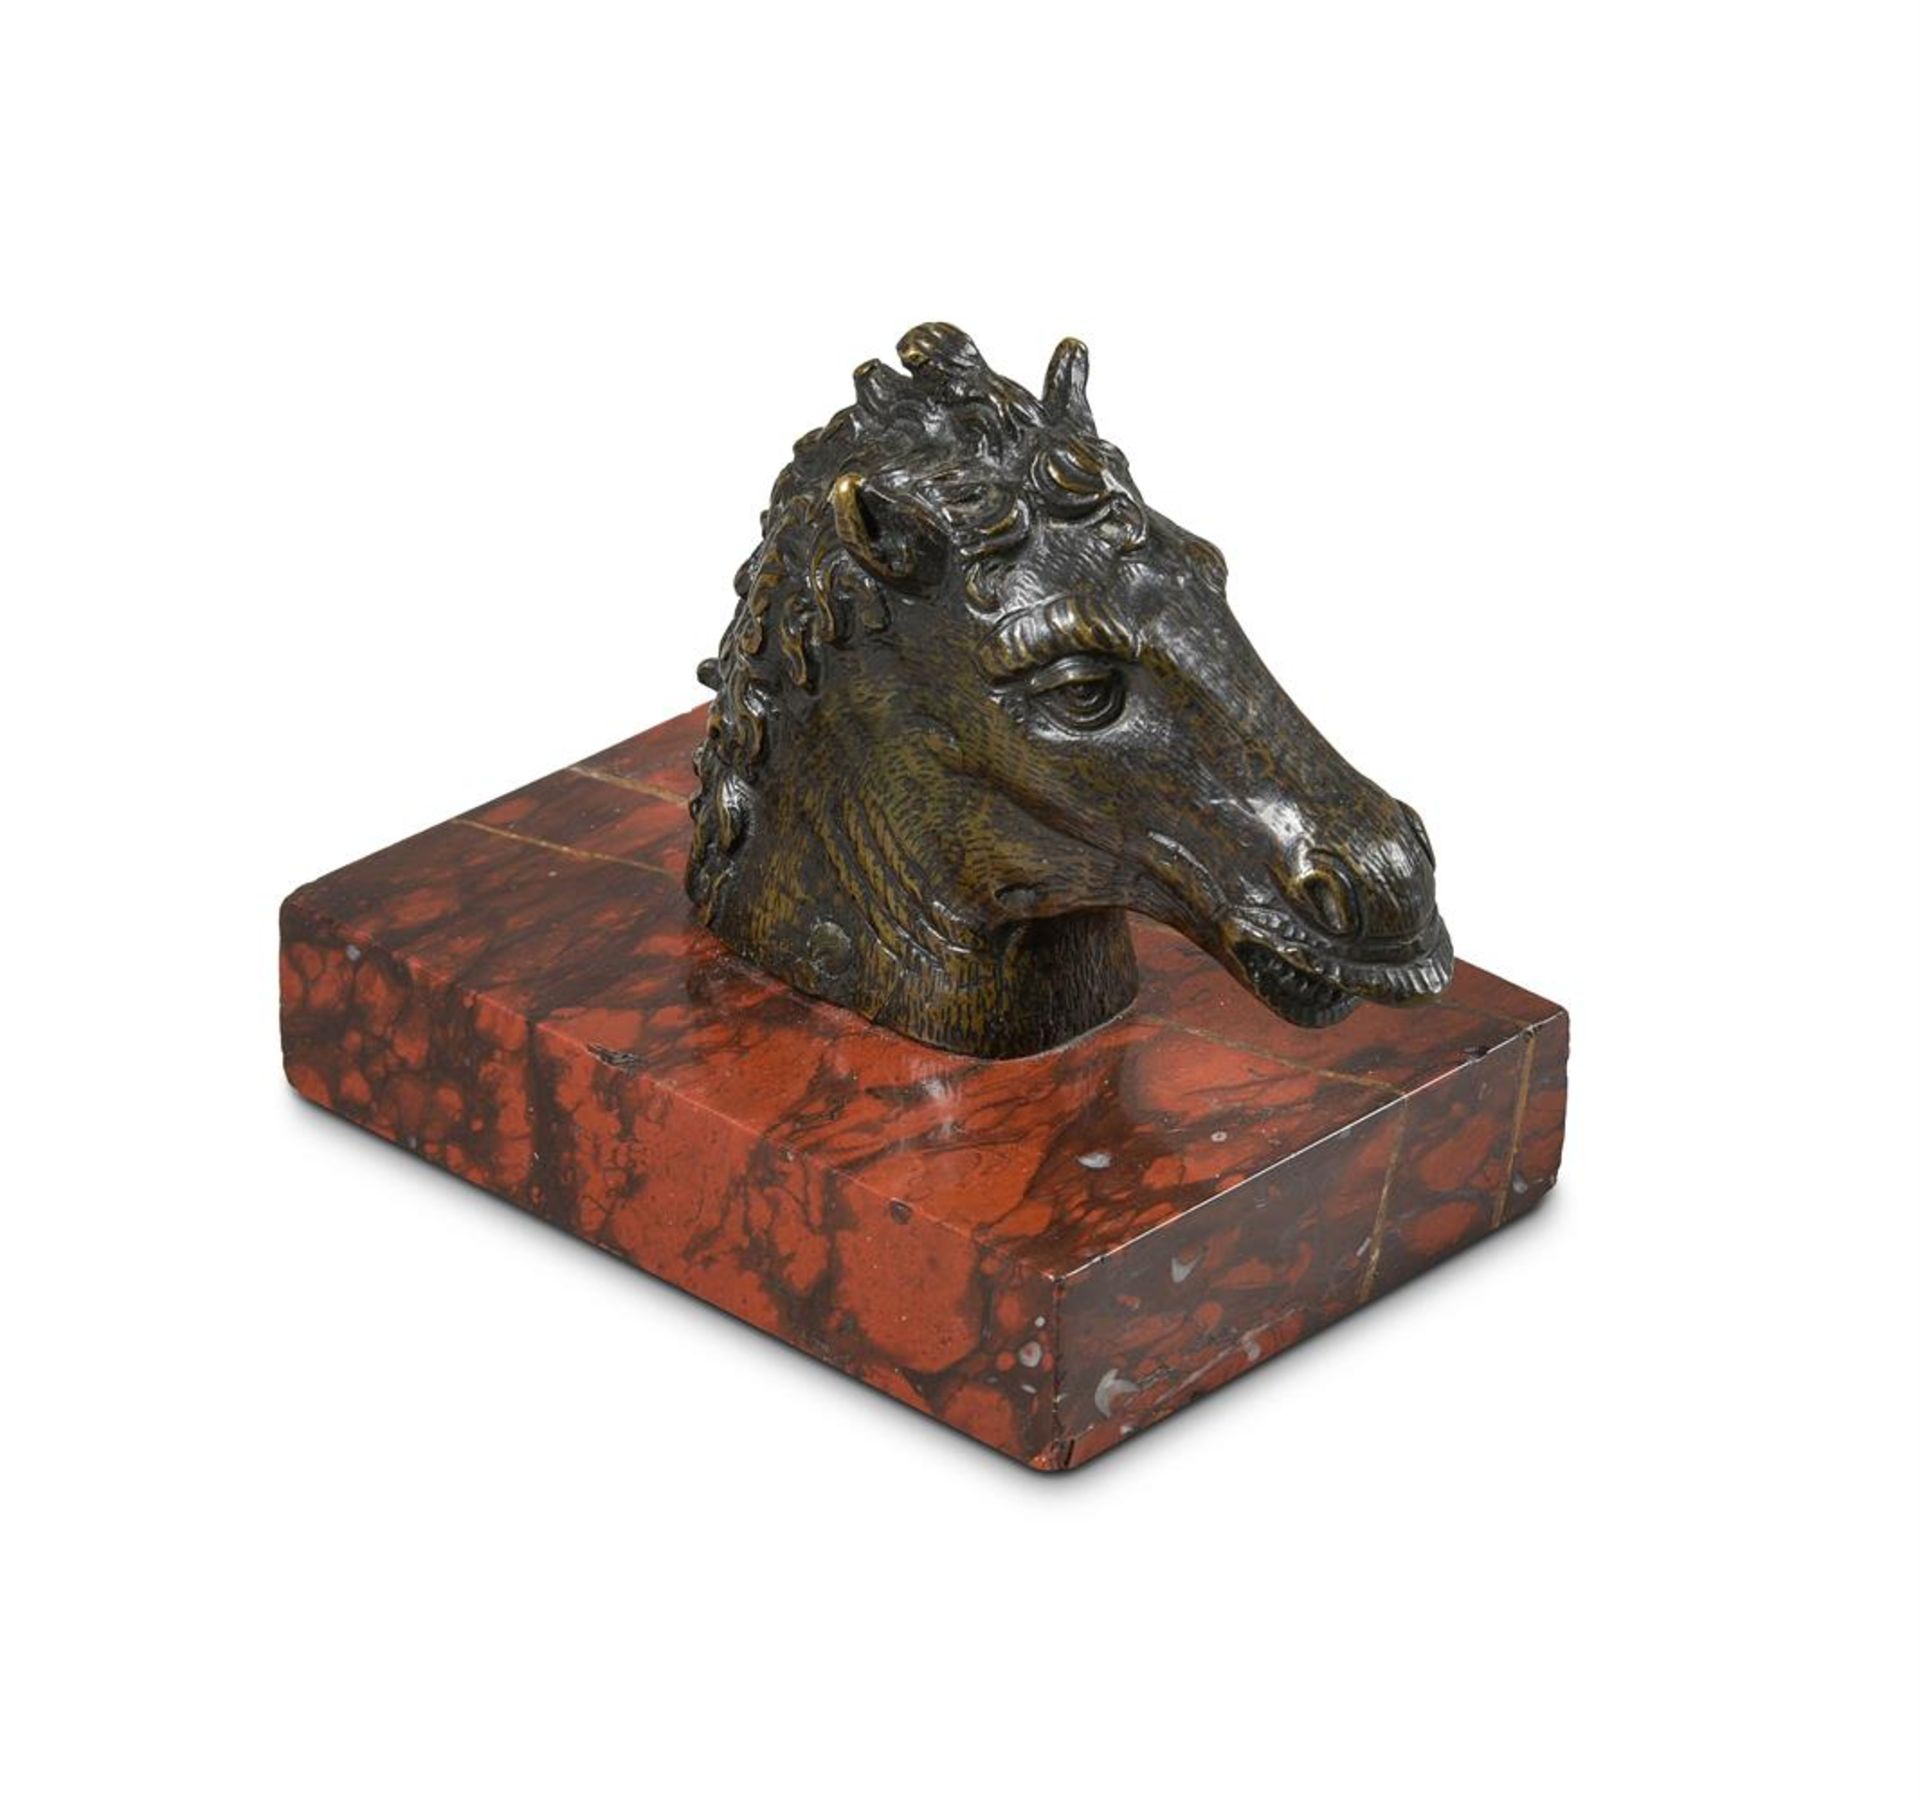 A BRONZE HORSE HEAD, IN THE 16TH CENTURY PADUAN STYLE, POSSIBLY LATE 18TH OR EARLY 19TH CENTURY